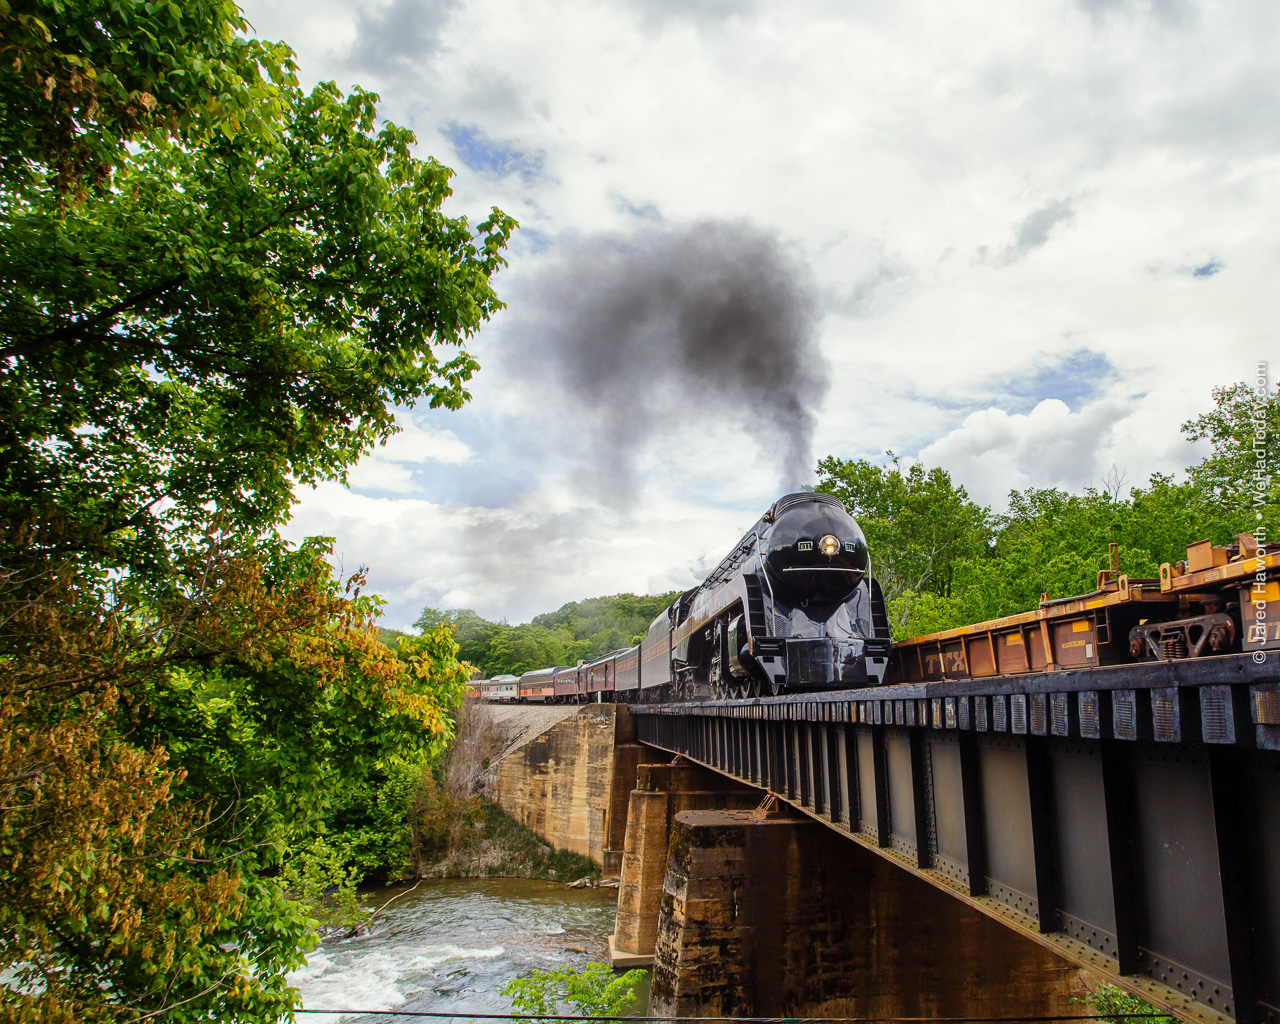 West of Salem, the N&W tracks cross over the Roanoke River, and the 611 paces a westbound containerized freight train.  Luckily, just as the steam train pulled around the corner, she met a series of empty well cars, leaving us with a more or less unobstructed background.